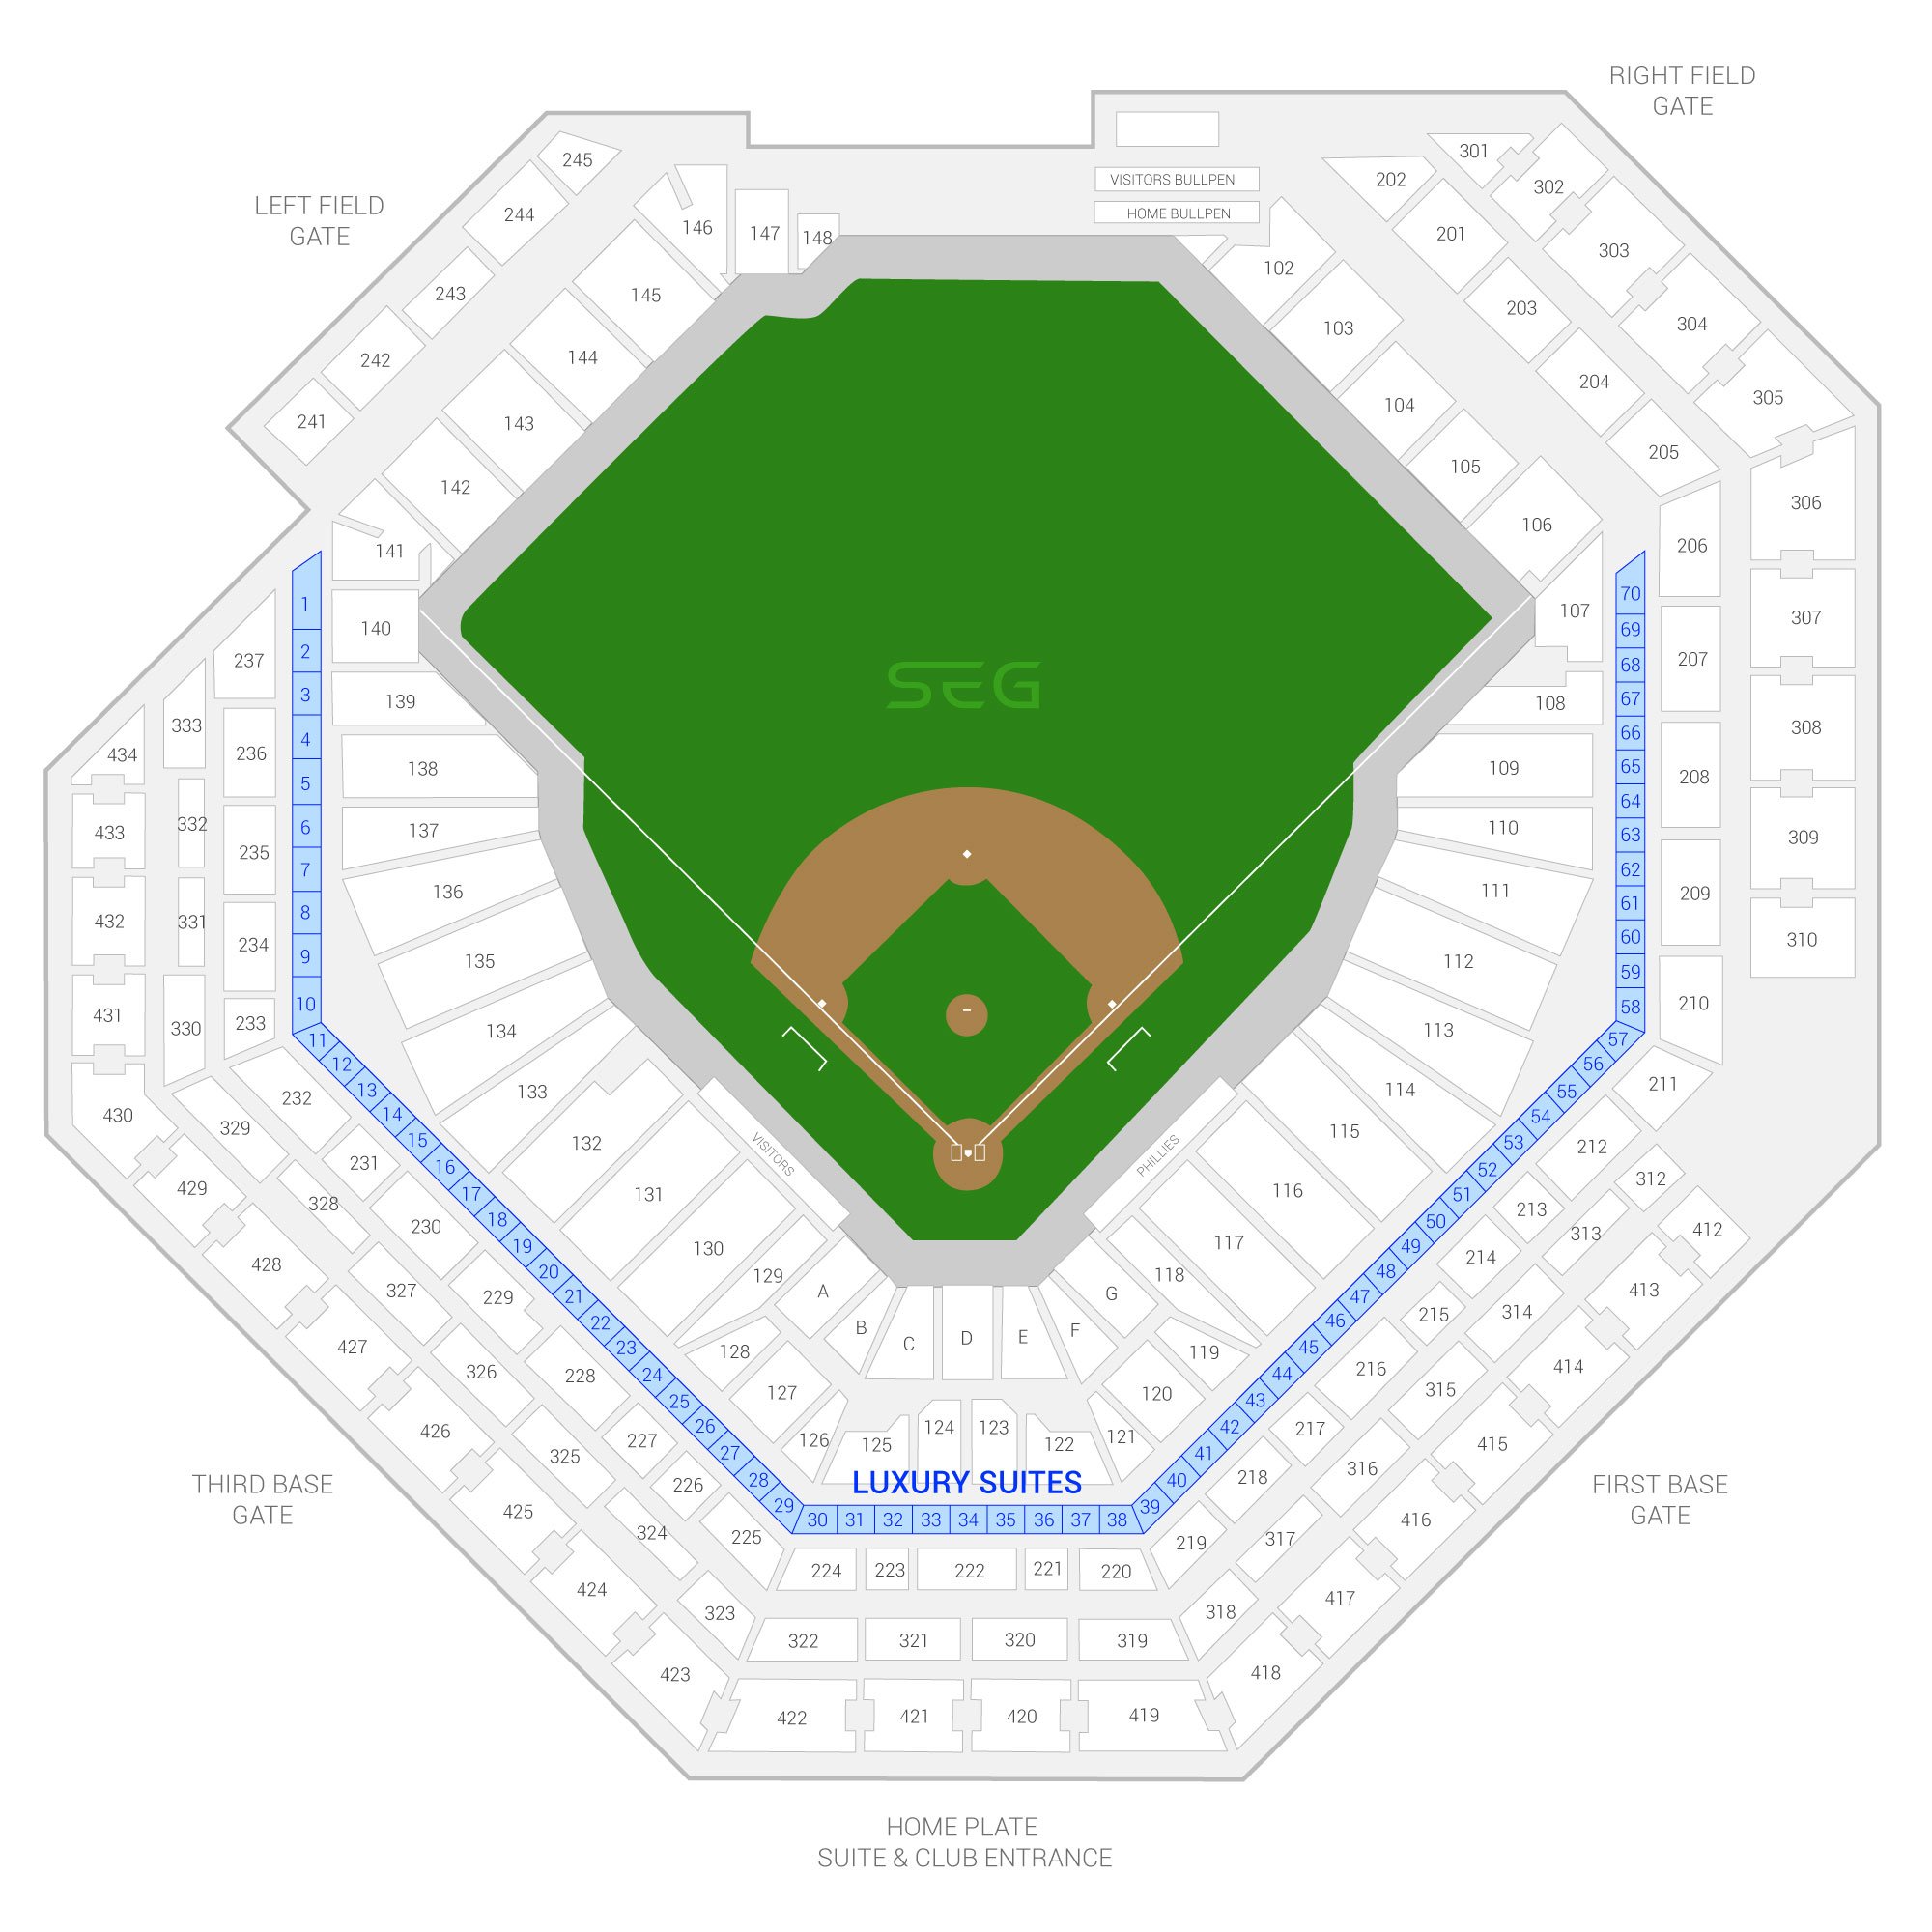 Citizens Bank Park / Philadelphia Phillies Suite Map and Seating Chart